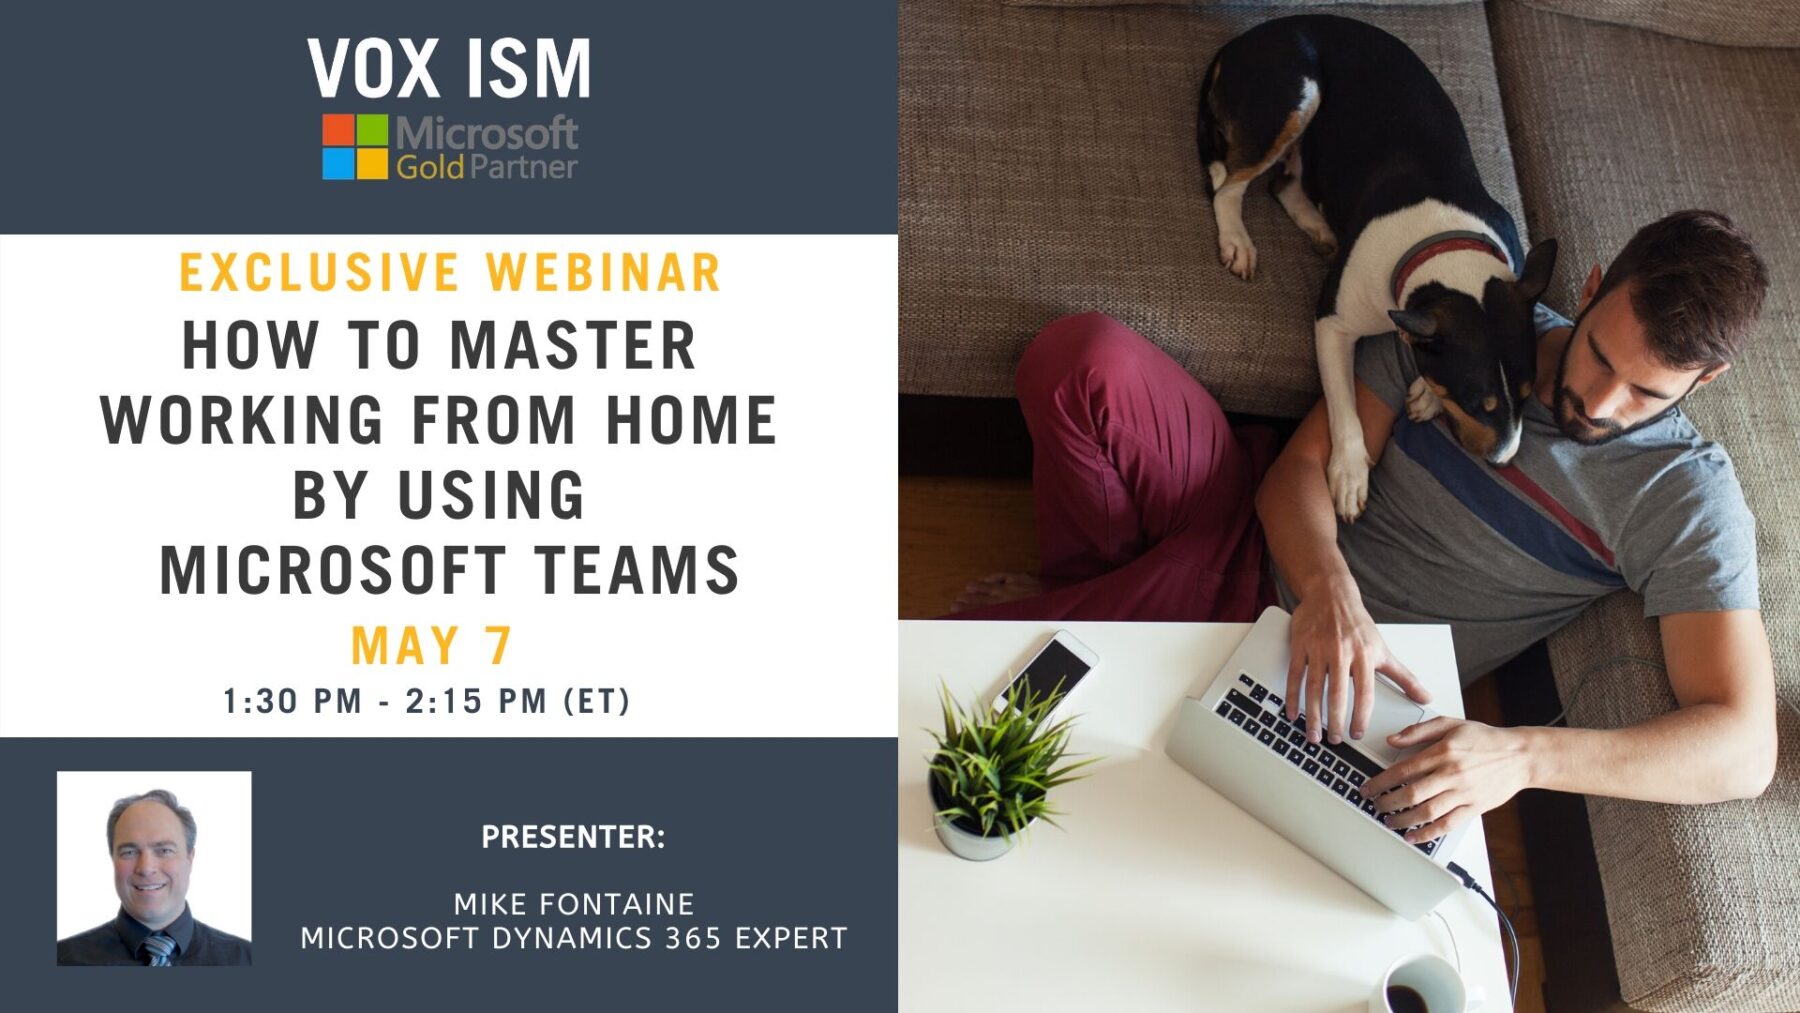 How to Master Working from Home While Under Isolation using Microsoft Teams - May 7 - Webinar VOX ISM